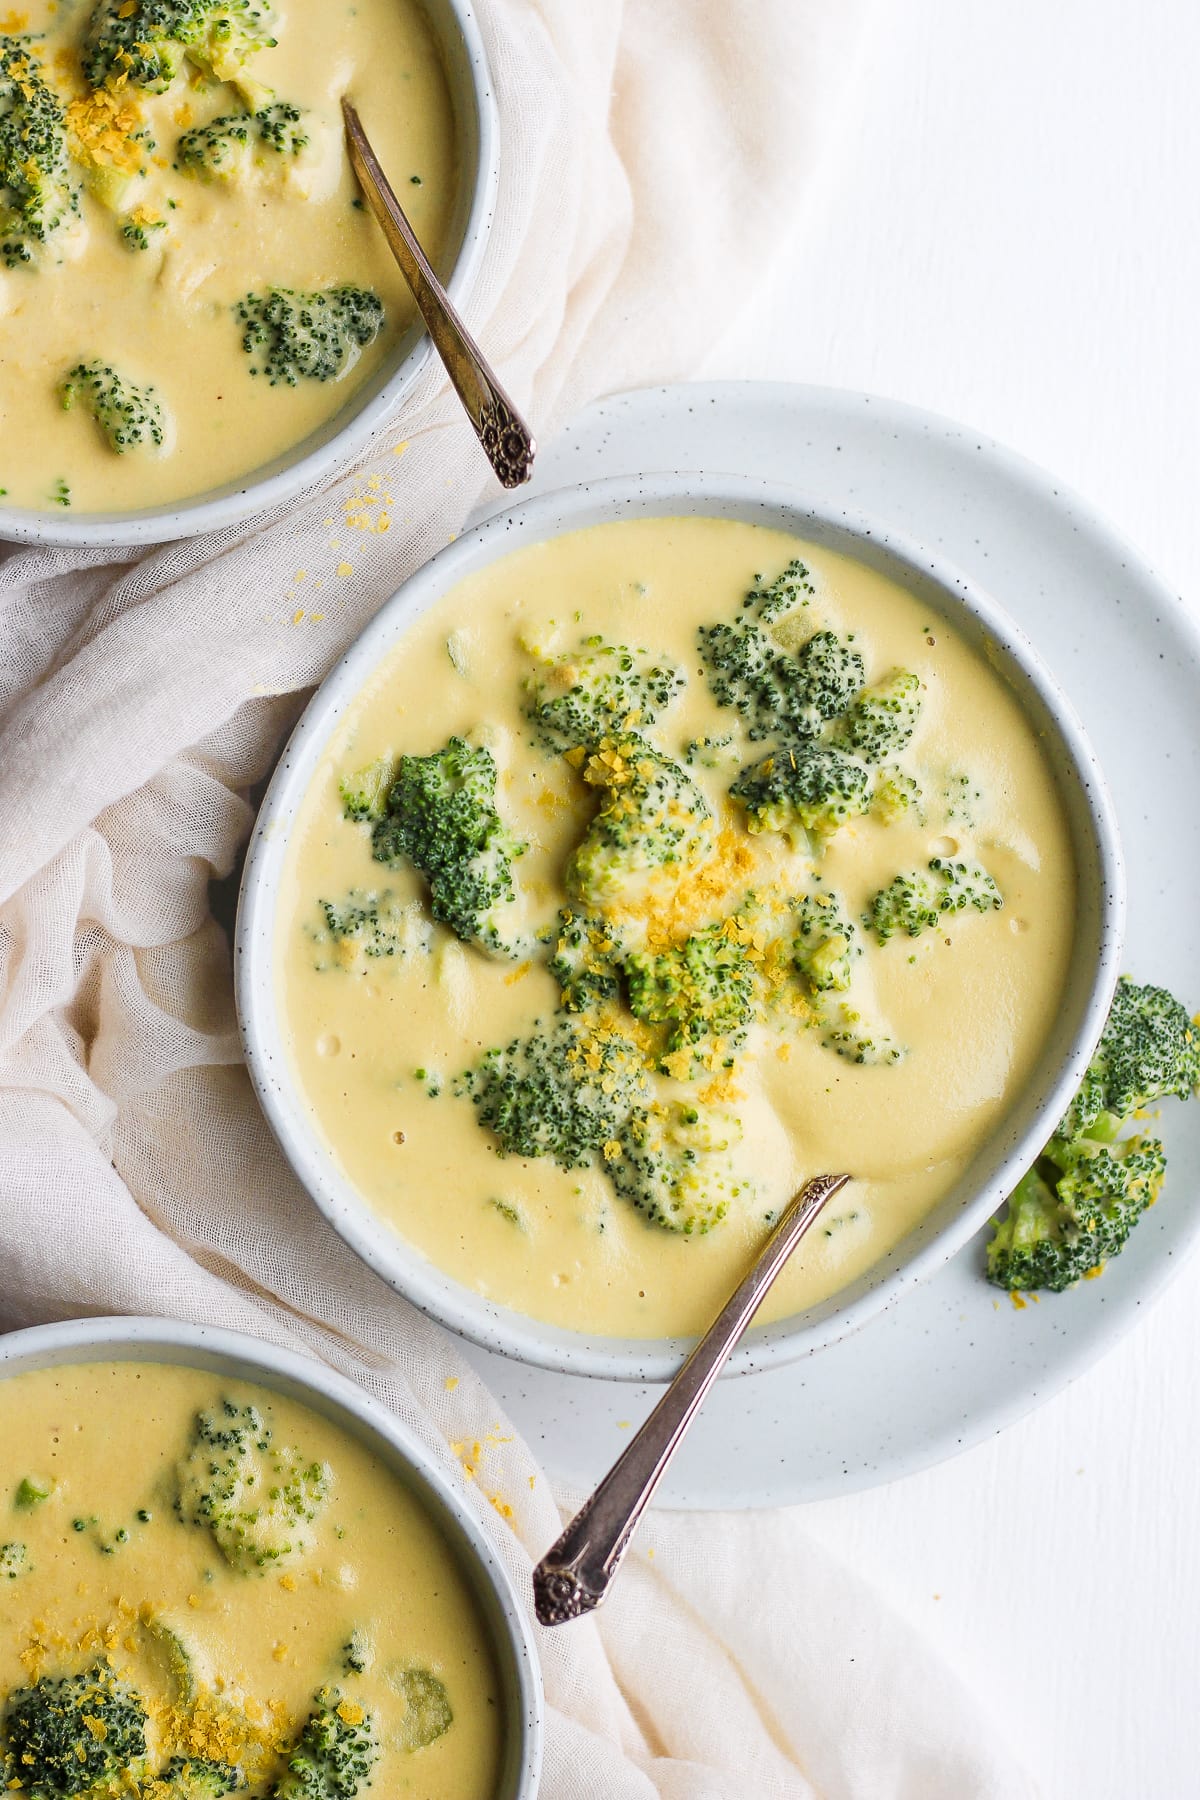 Dreamy Dairy-Free Broccoli Cheese Soup - the most amazing broccoli cheese soup that is dairy-free, vegan and Whole30!! #whole30 #dairyfree #vegan #plantbased #fallrecipes